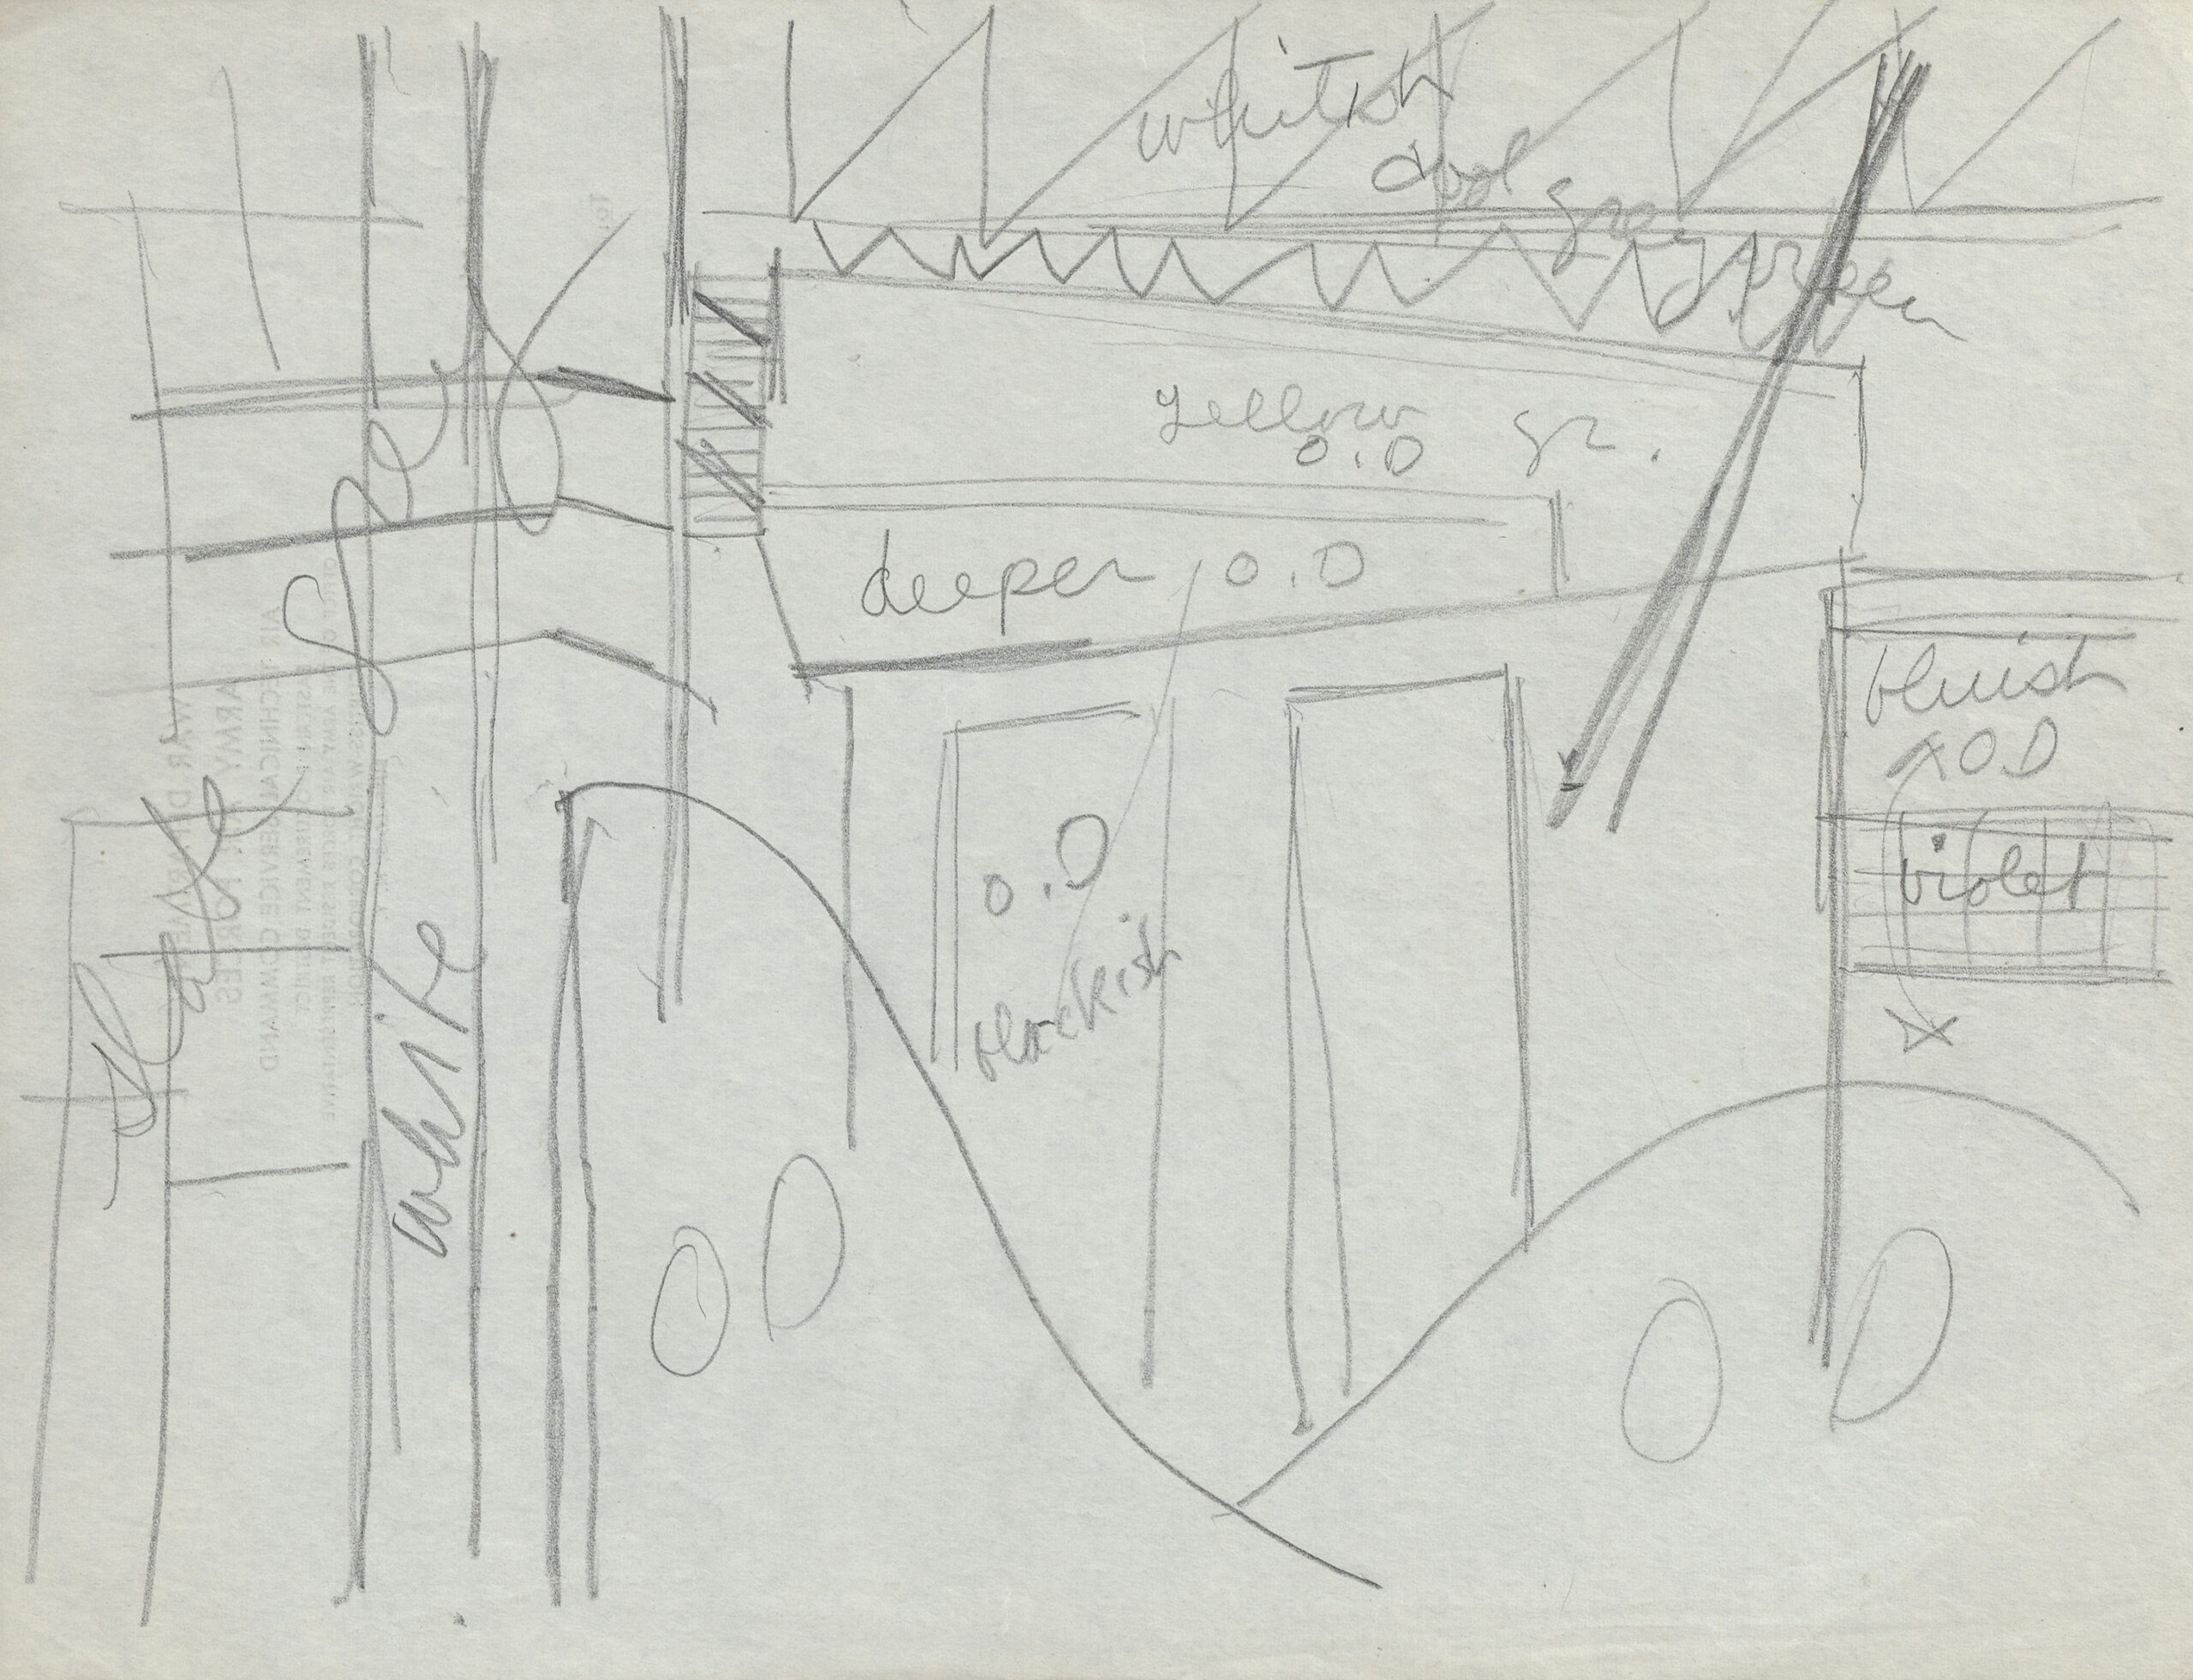 Pencil sketch of the aircraft factory ceiling with notations.